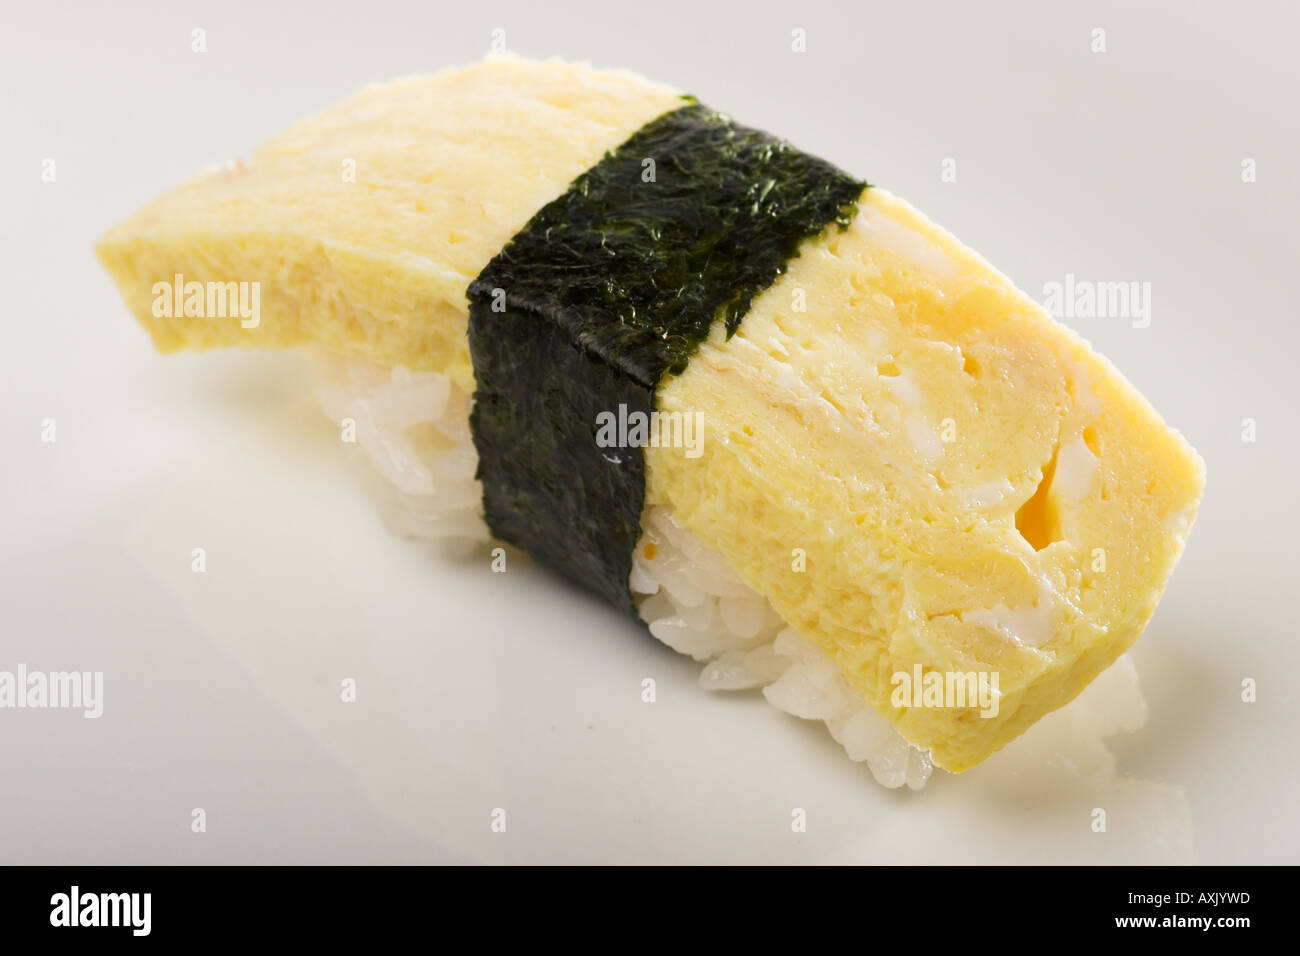 tamago egg sushi fresh white yellow seaweed rice rapped appetizer meal Asian consumption eat food Stock Photo